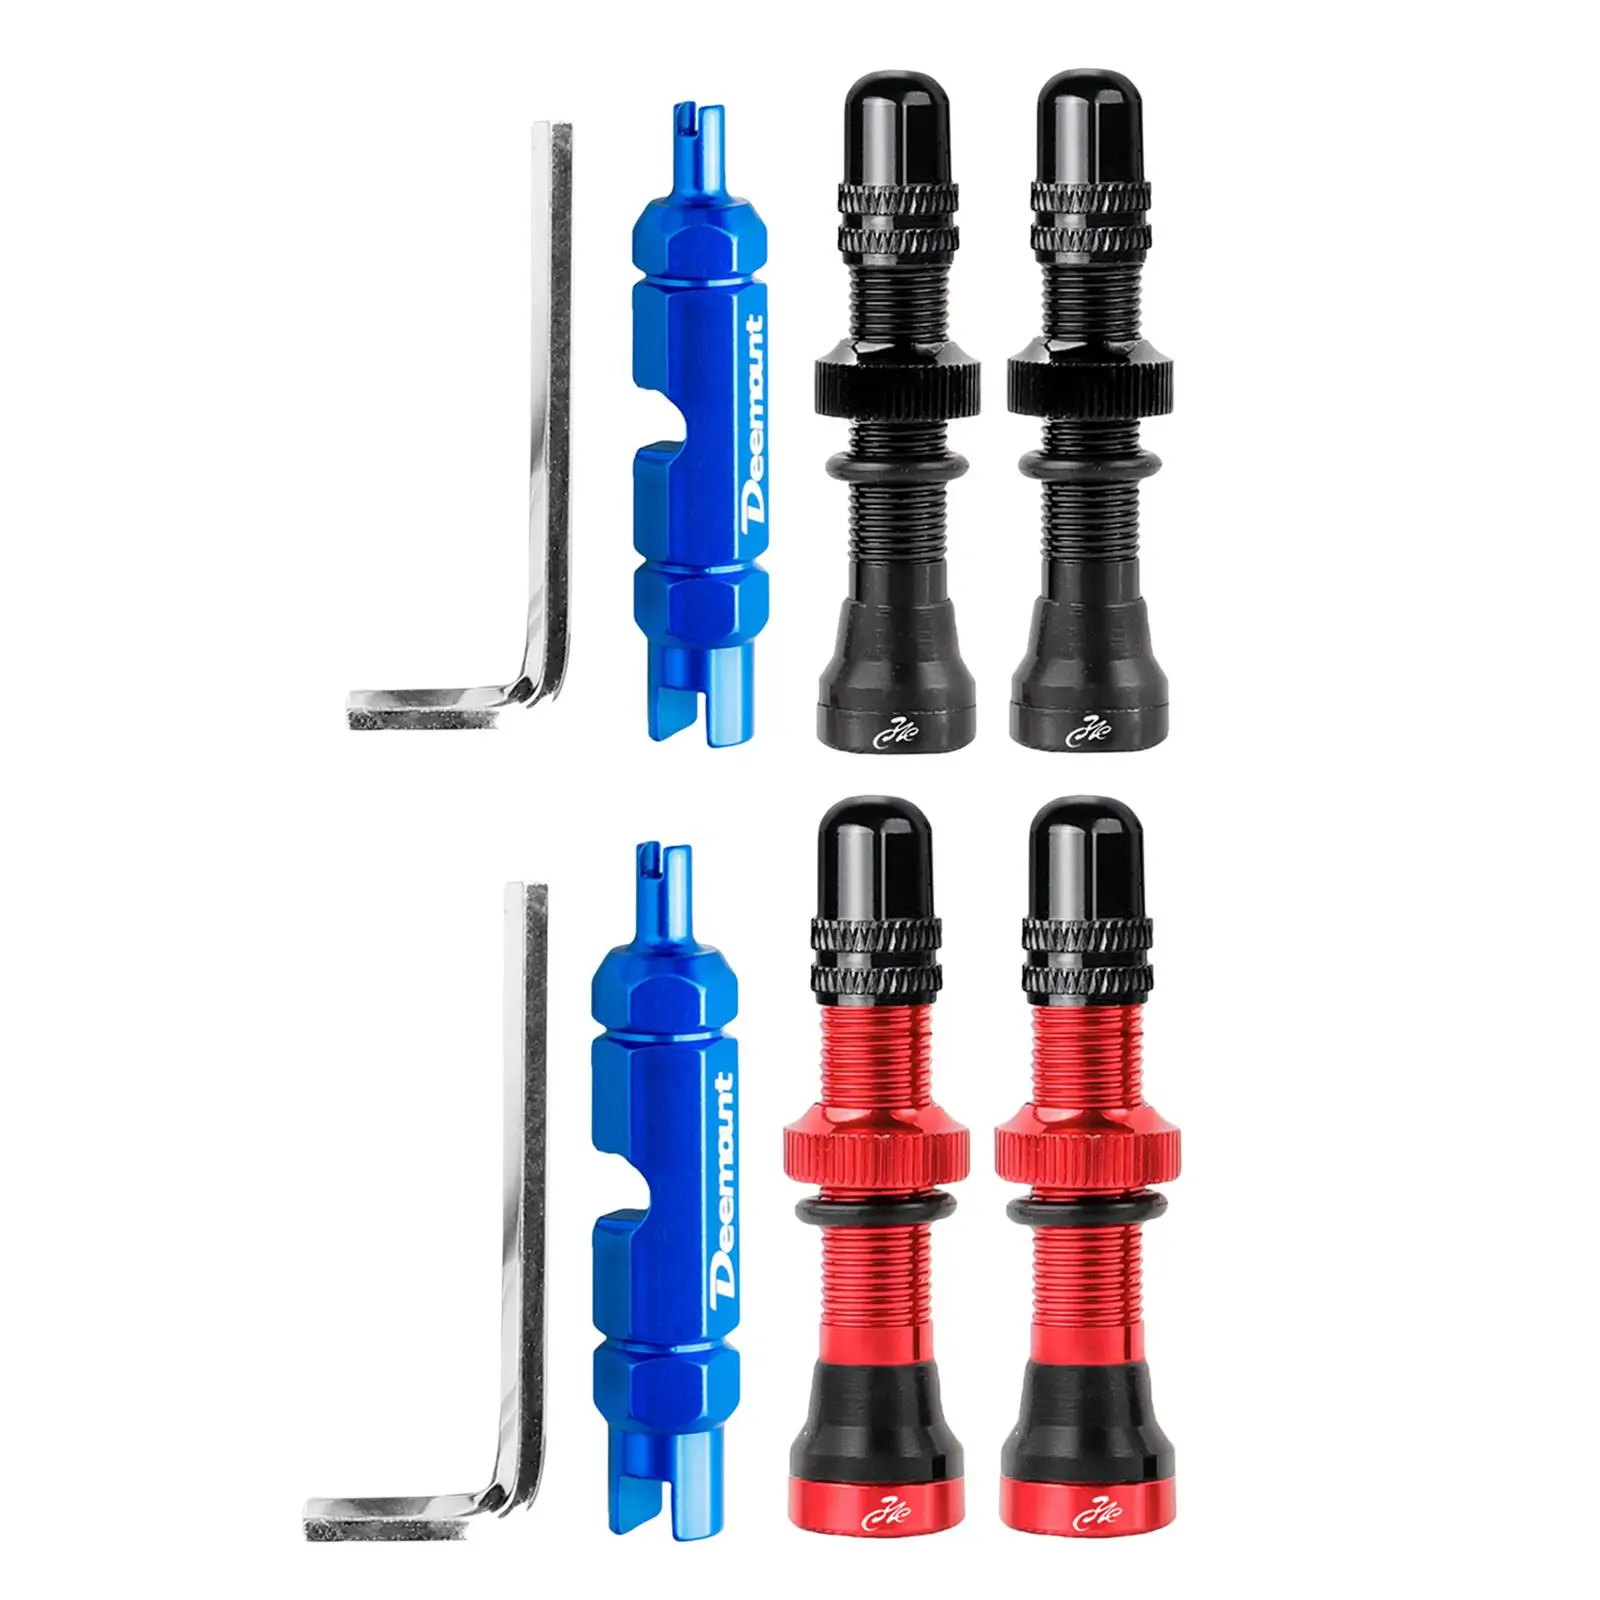 Valve , Replacement  Valve Remover Tool Kit, Tubeless Valve Core for Universal Road Bike Car with Wrench